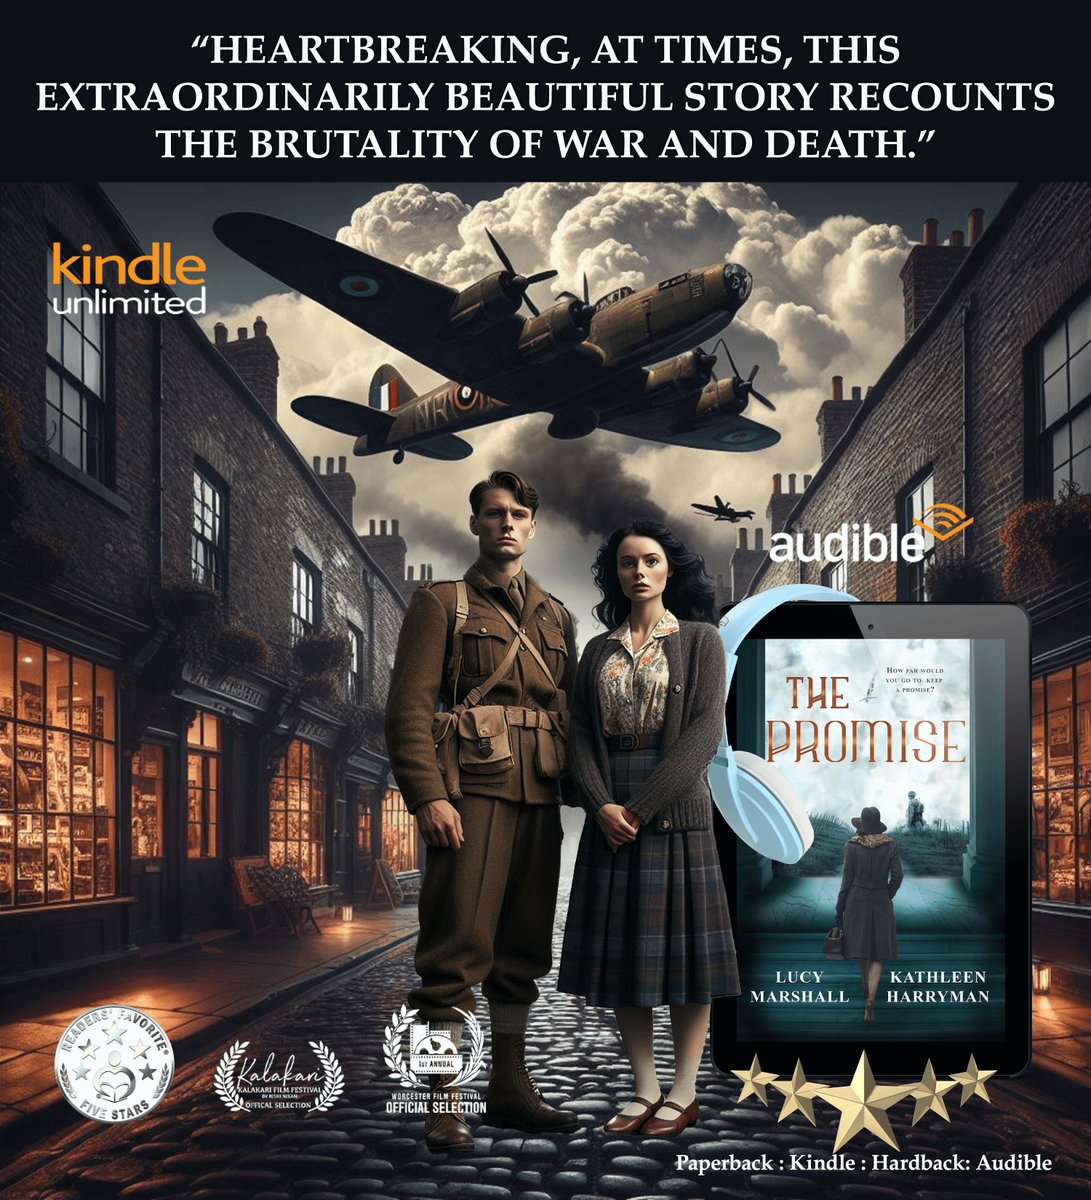 #BookReview “A compelling, well-crafted, gripping story that engages the reader from start to finish.' #KindleUnlimited #Paperback #Kindle #Audible buff.ly/30SIMZD #romance #histfic #historicalfiction #war #WW2 #military #medical #IARTG #HistoricalRomance